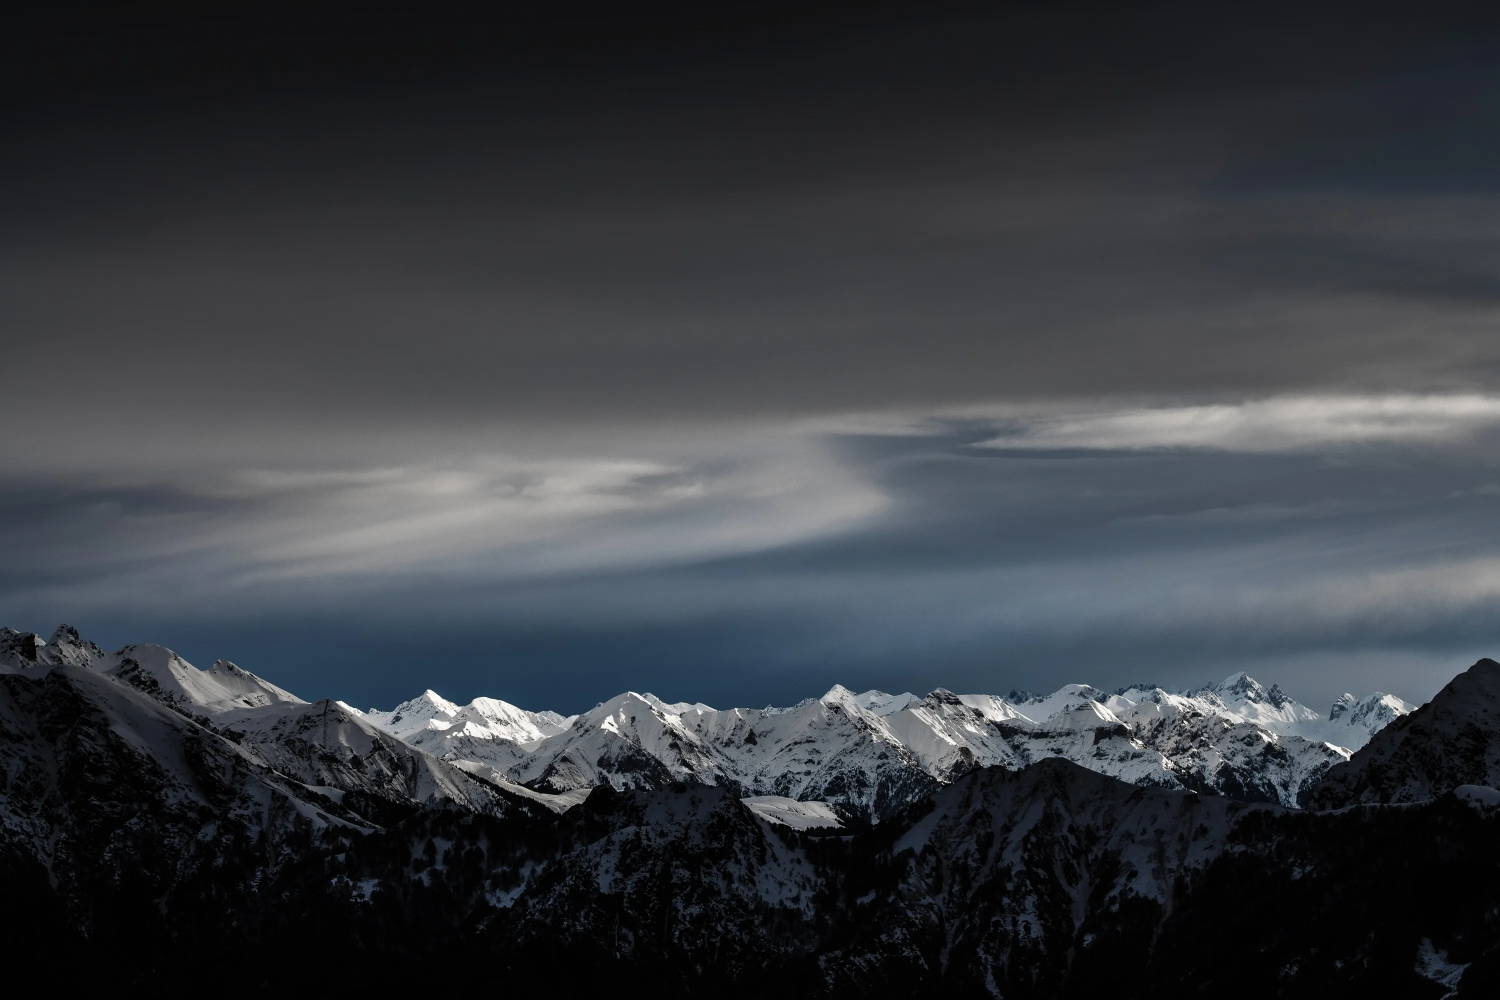 Hazy blue and grey skies above a snowy mountain range